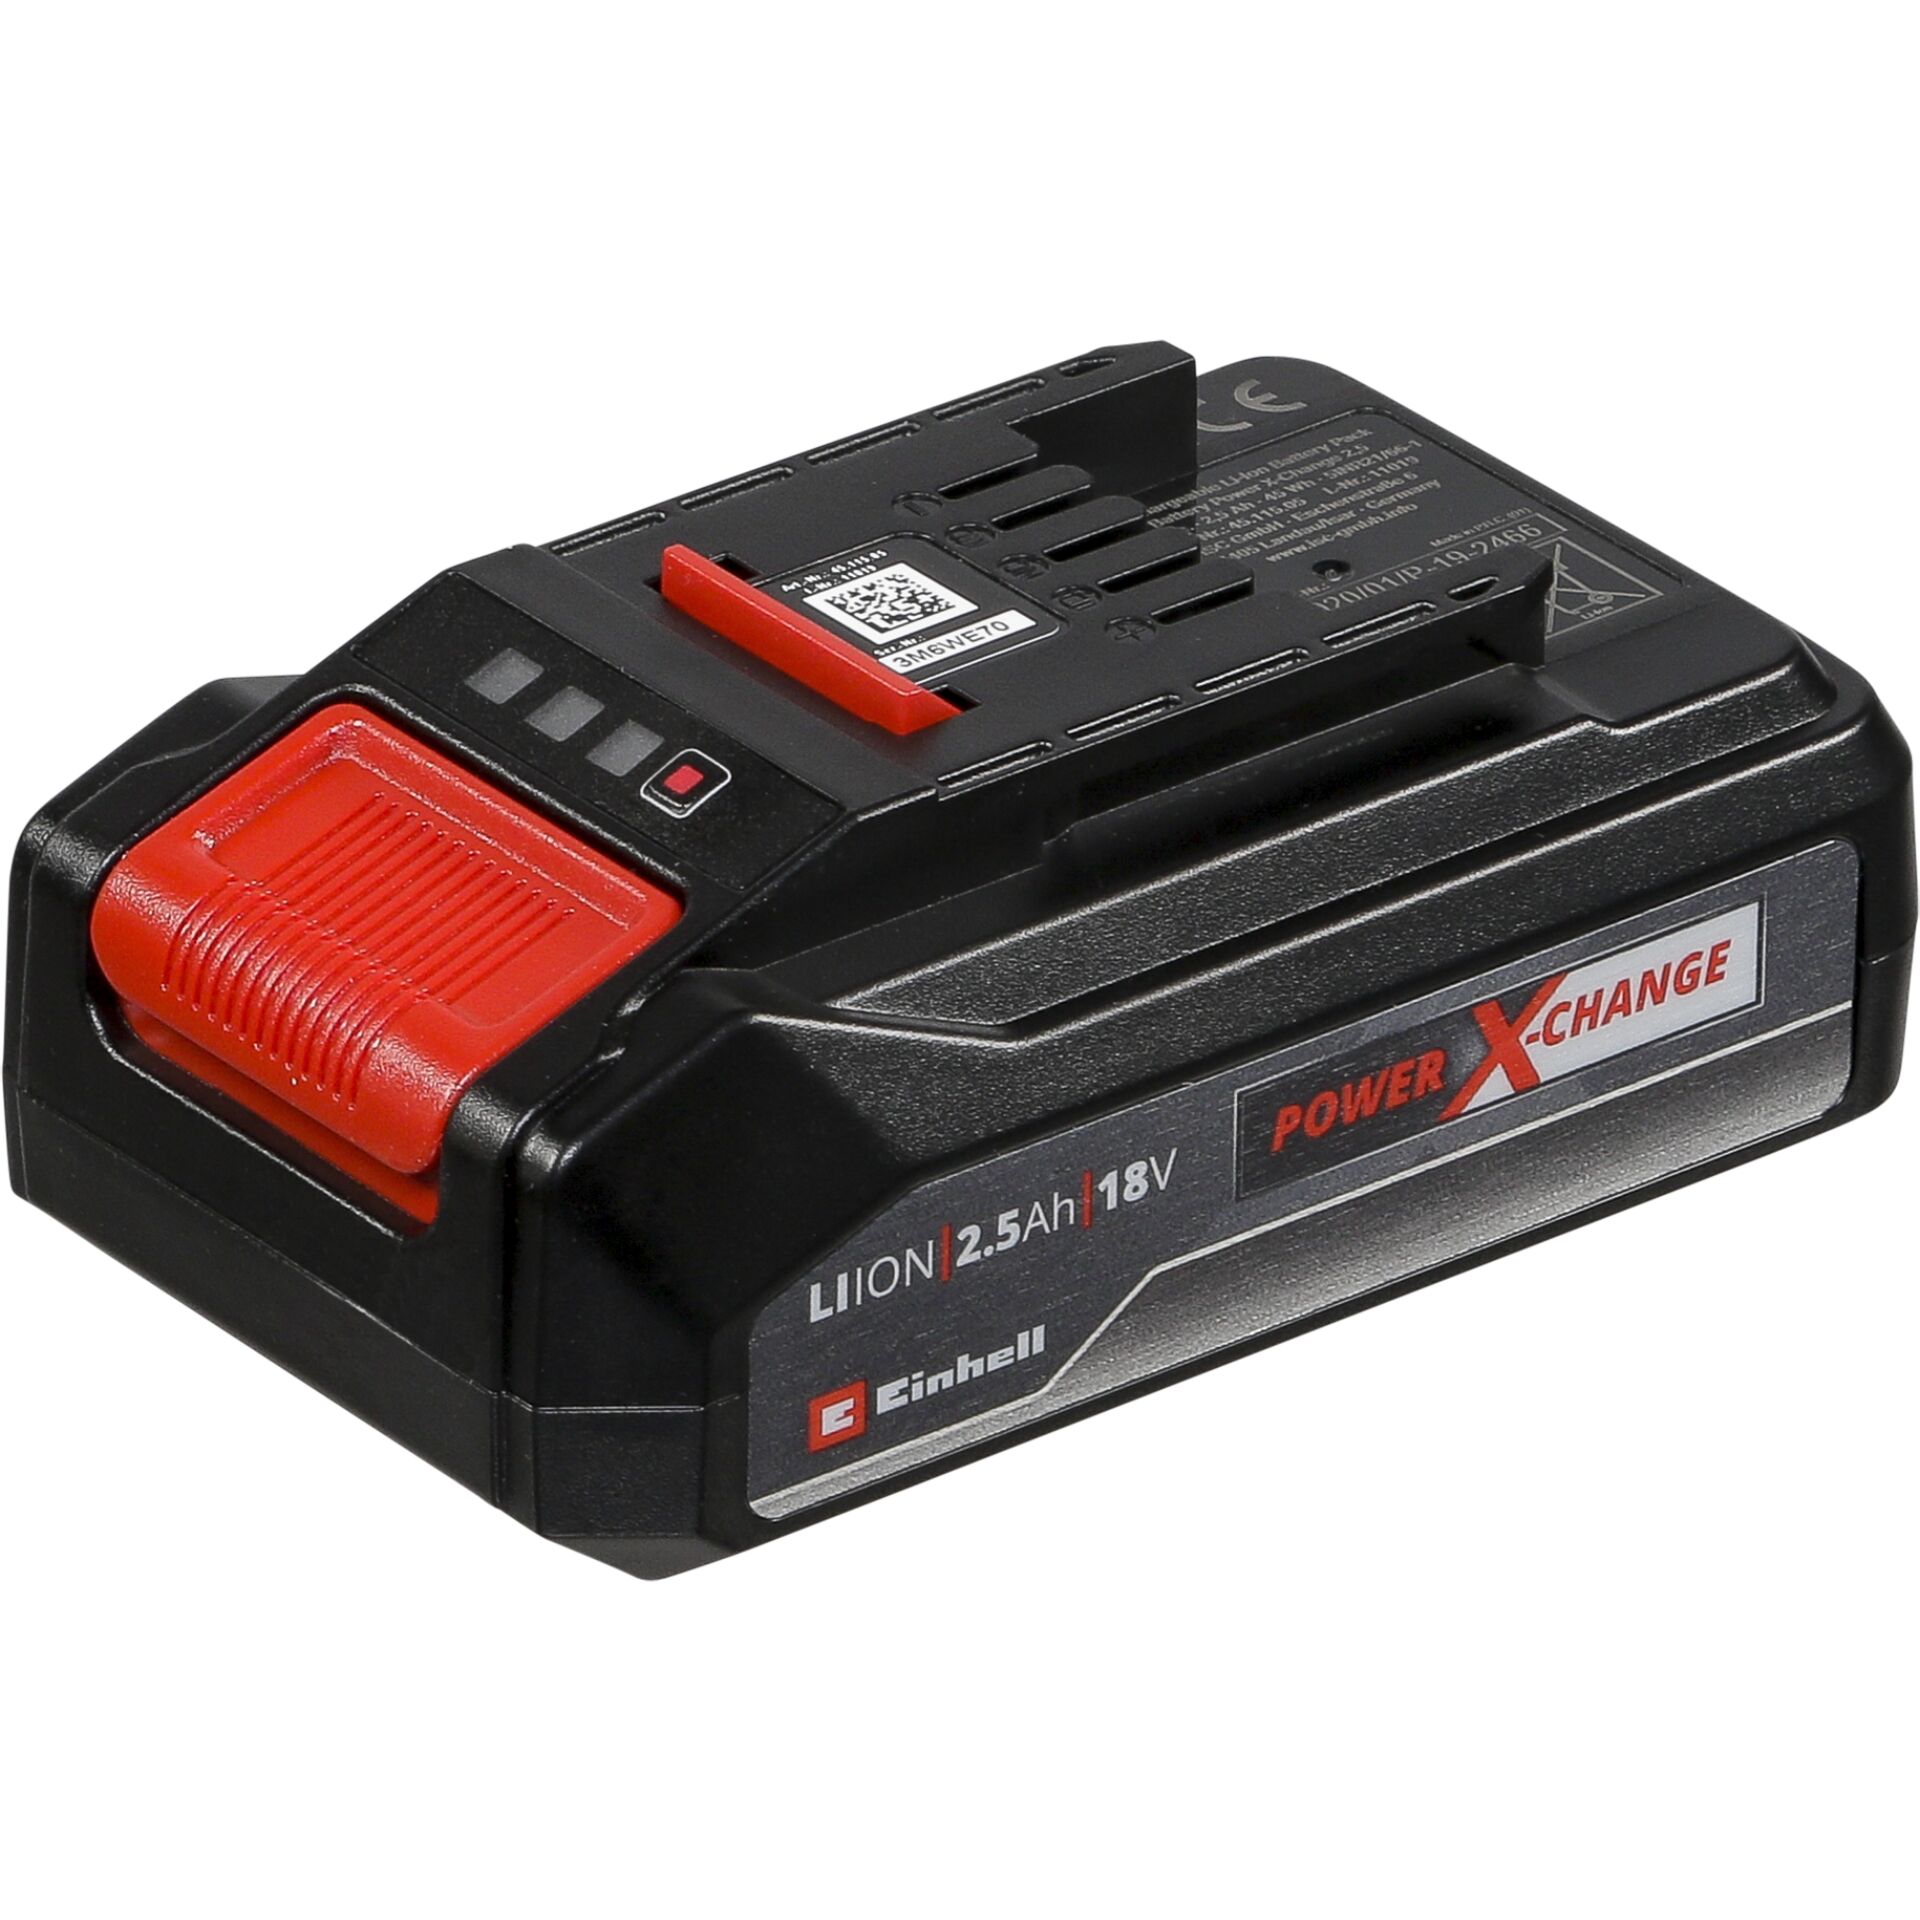 Einhell 4511516 cordless tool battery / charger